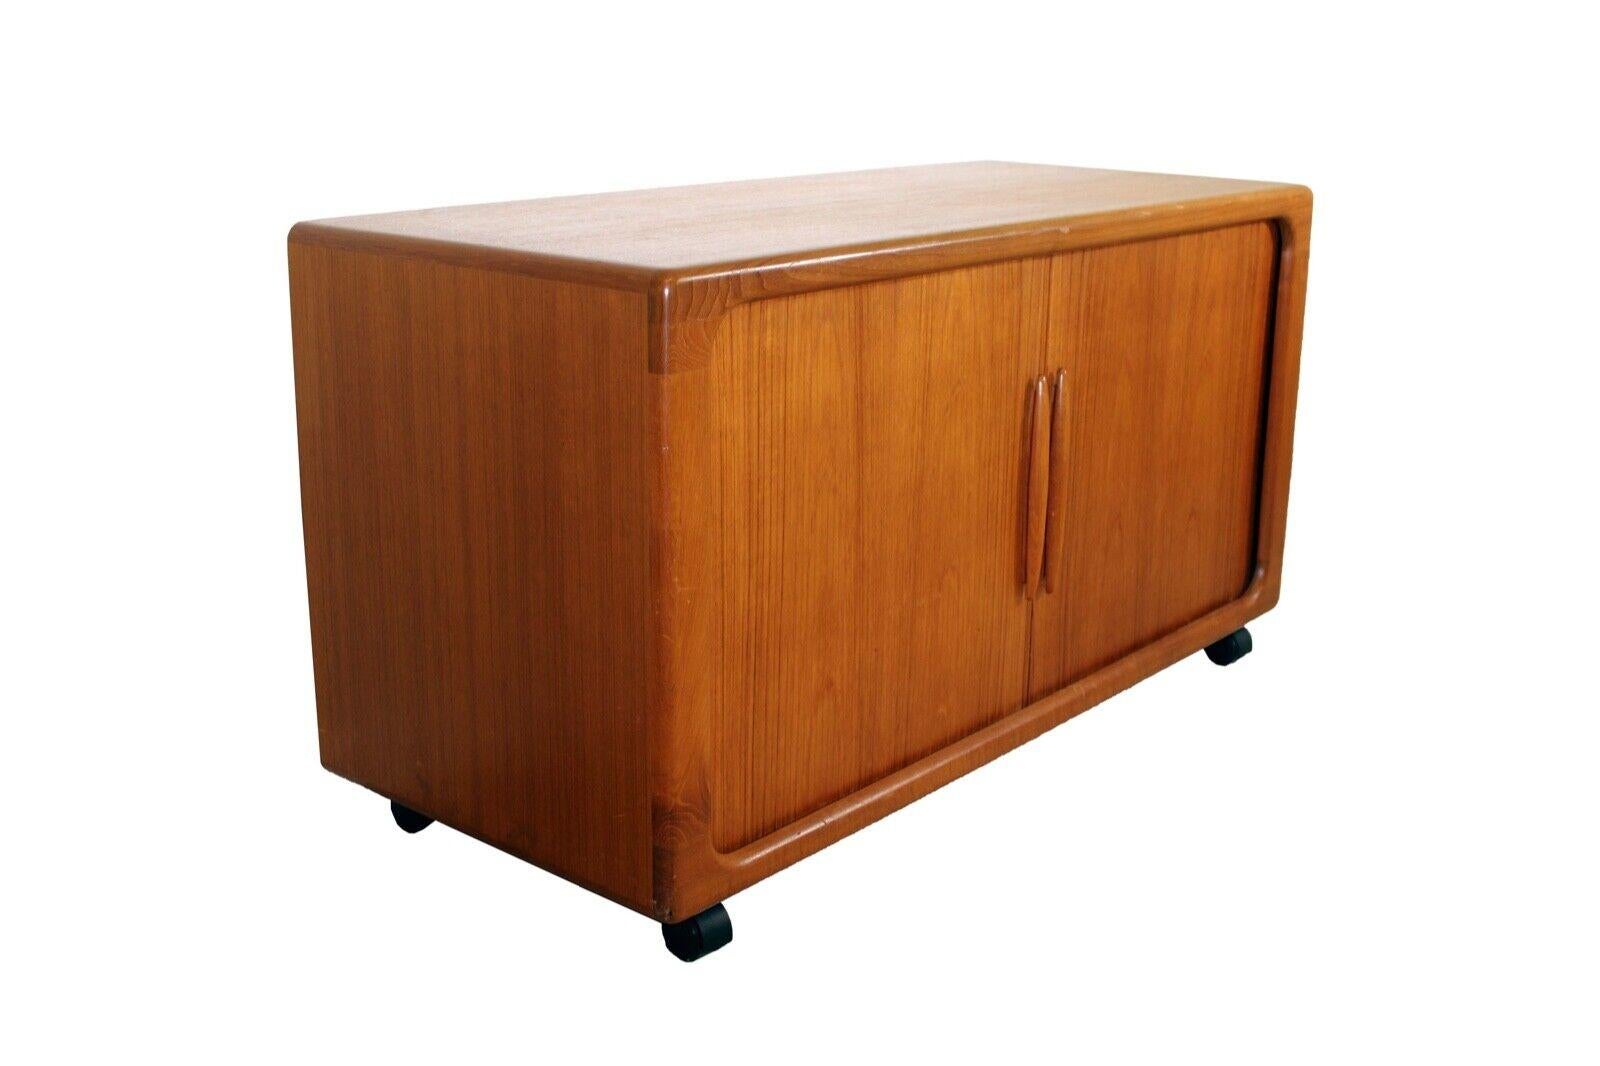 A stunning teak media console/credenza created by Dyrlund in the 1960s. Sleek organic shaping and sliding doors that disappear when credenza is opened. In very good vintage condition. Dimensions: 49